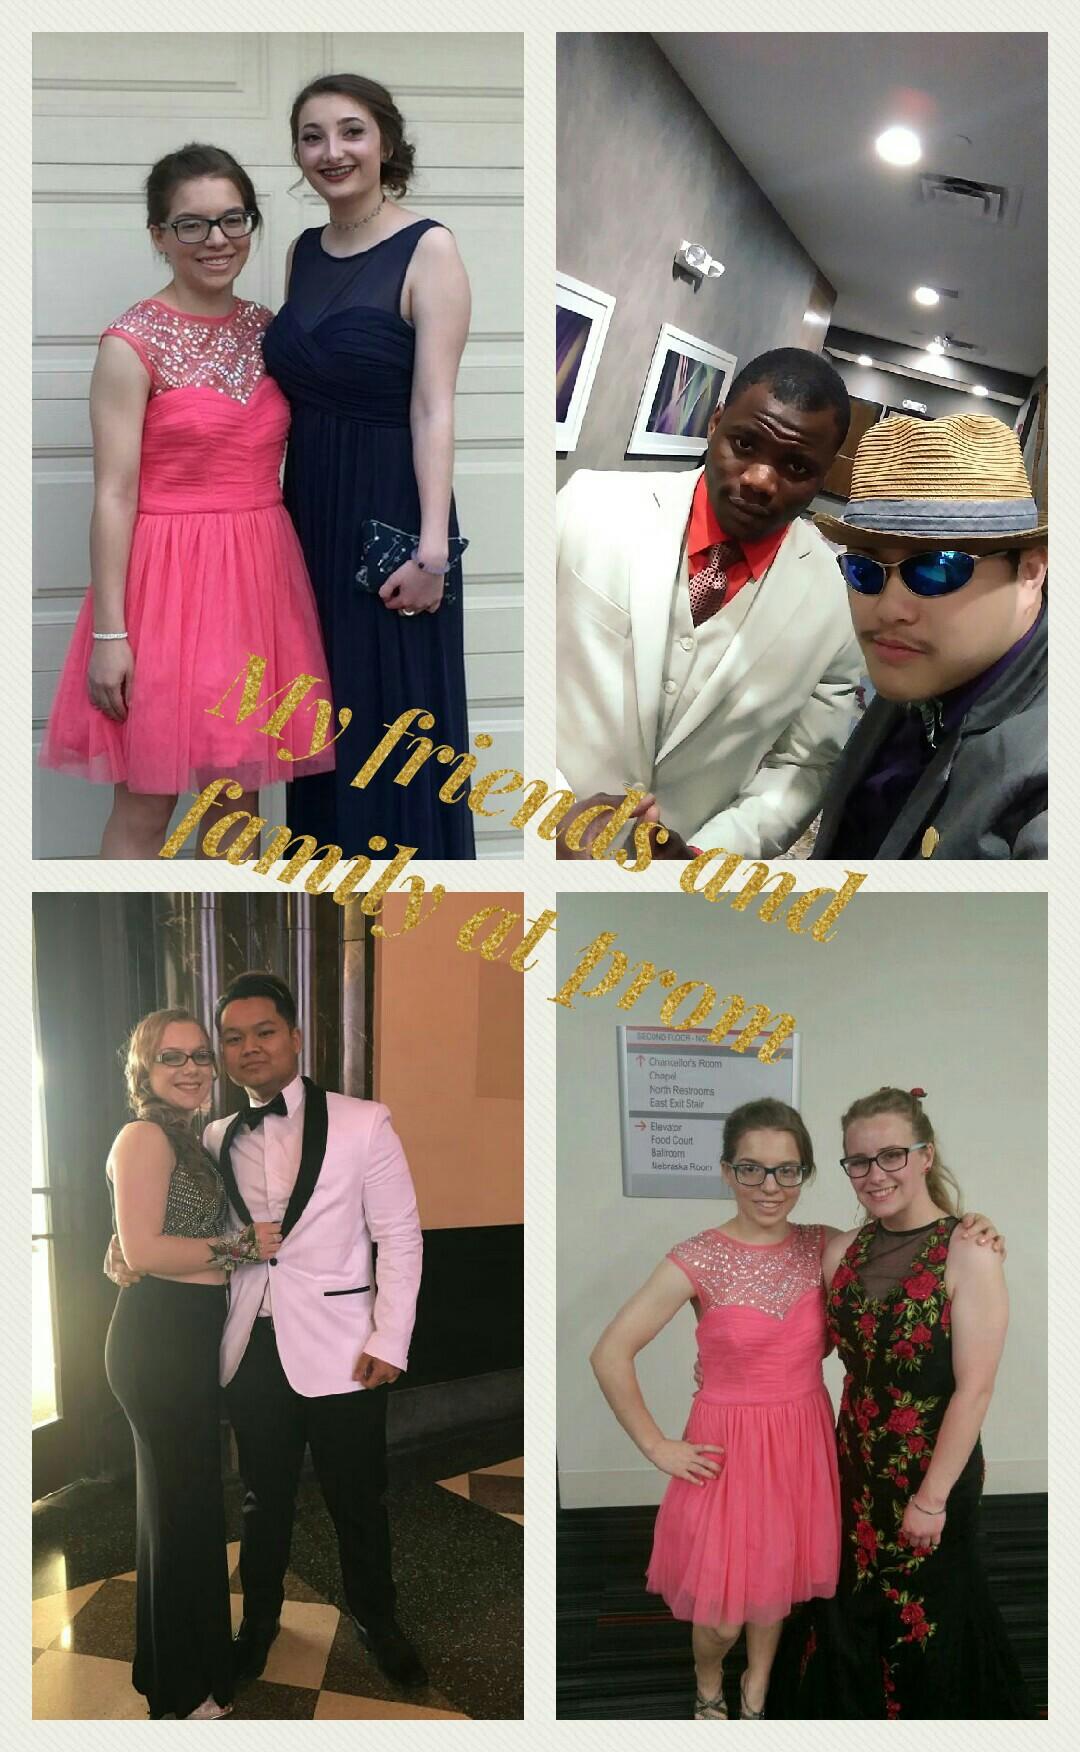 My friends and family at prom